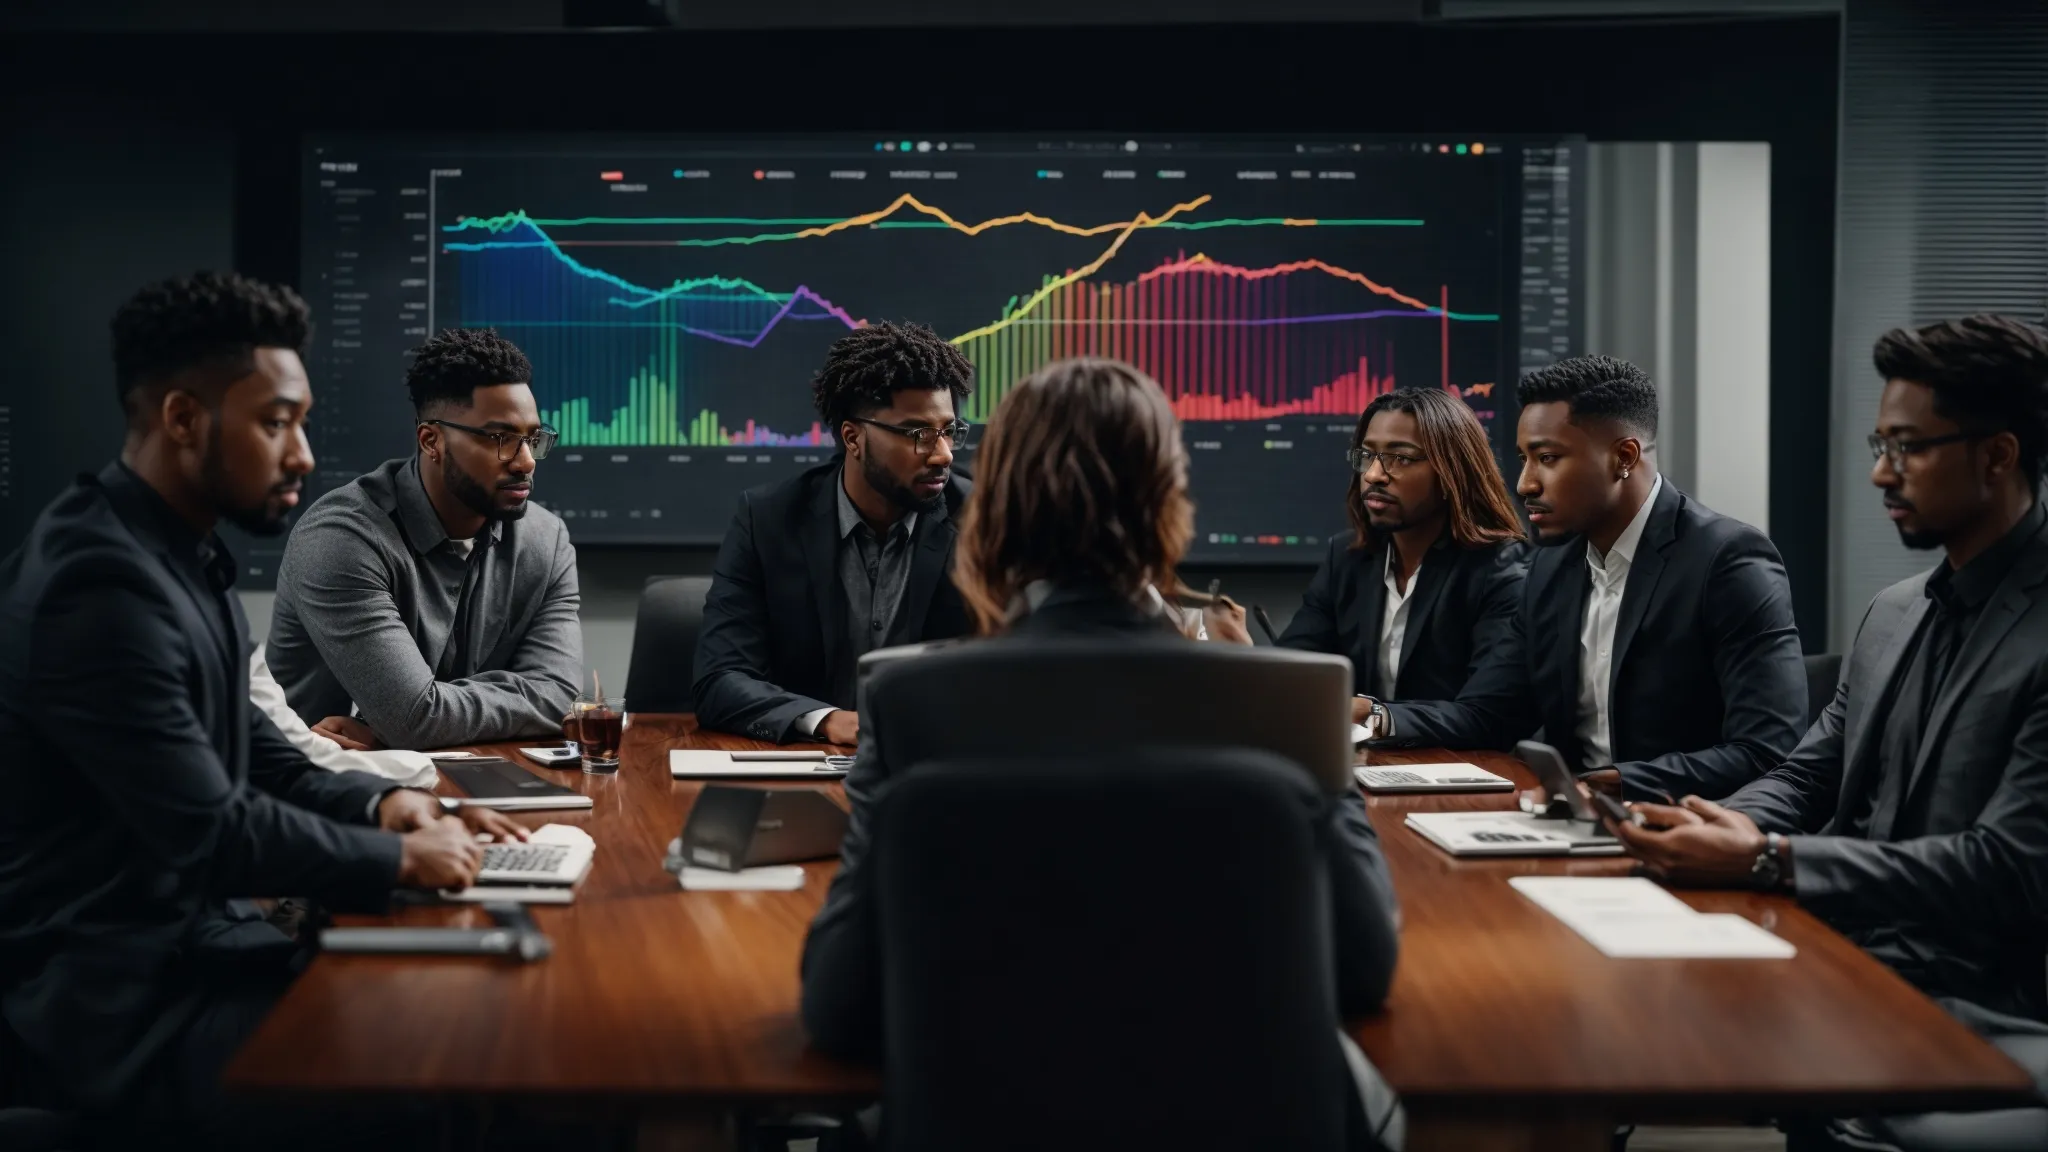 a diverse group of professionals gather around a conference table, intently focused on a central laptop displaying colorful graphs and analytics.